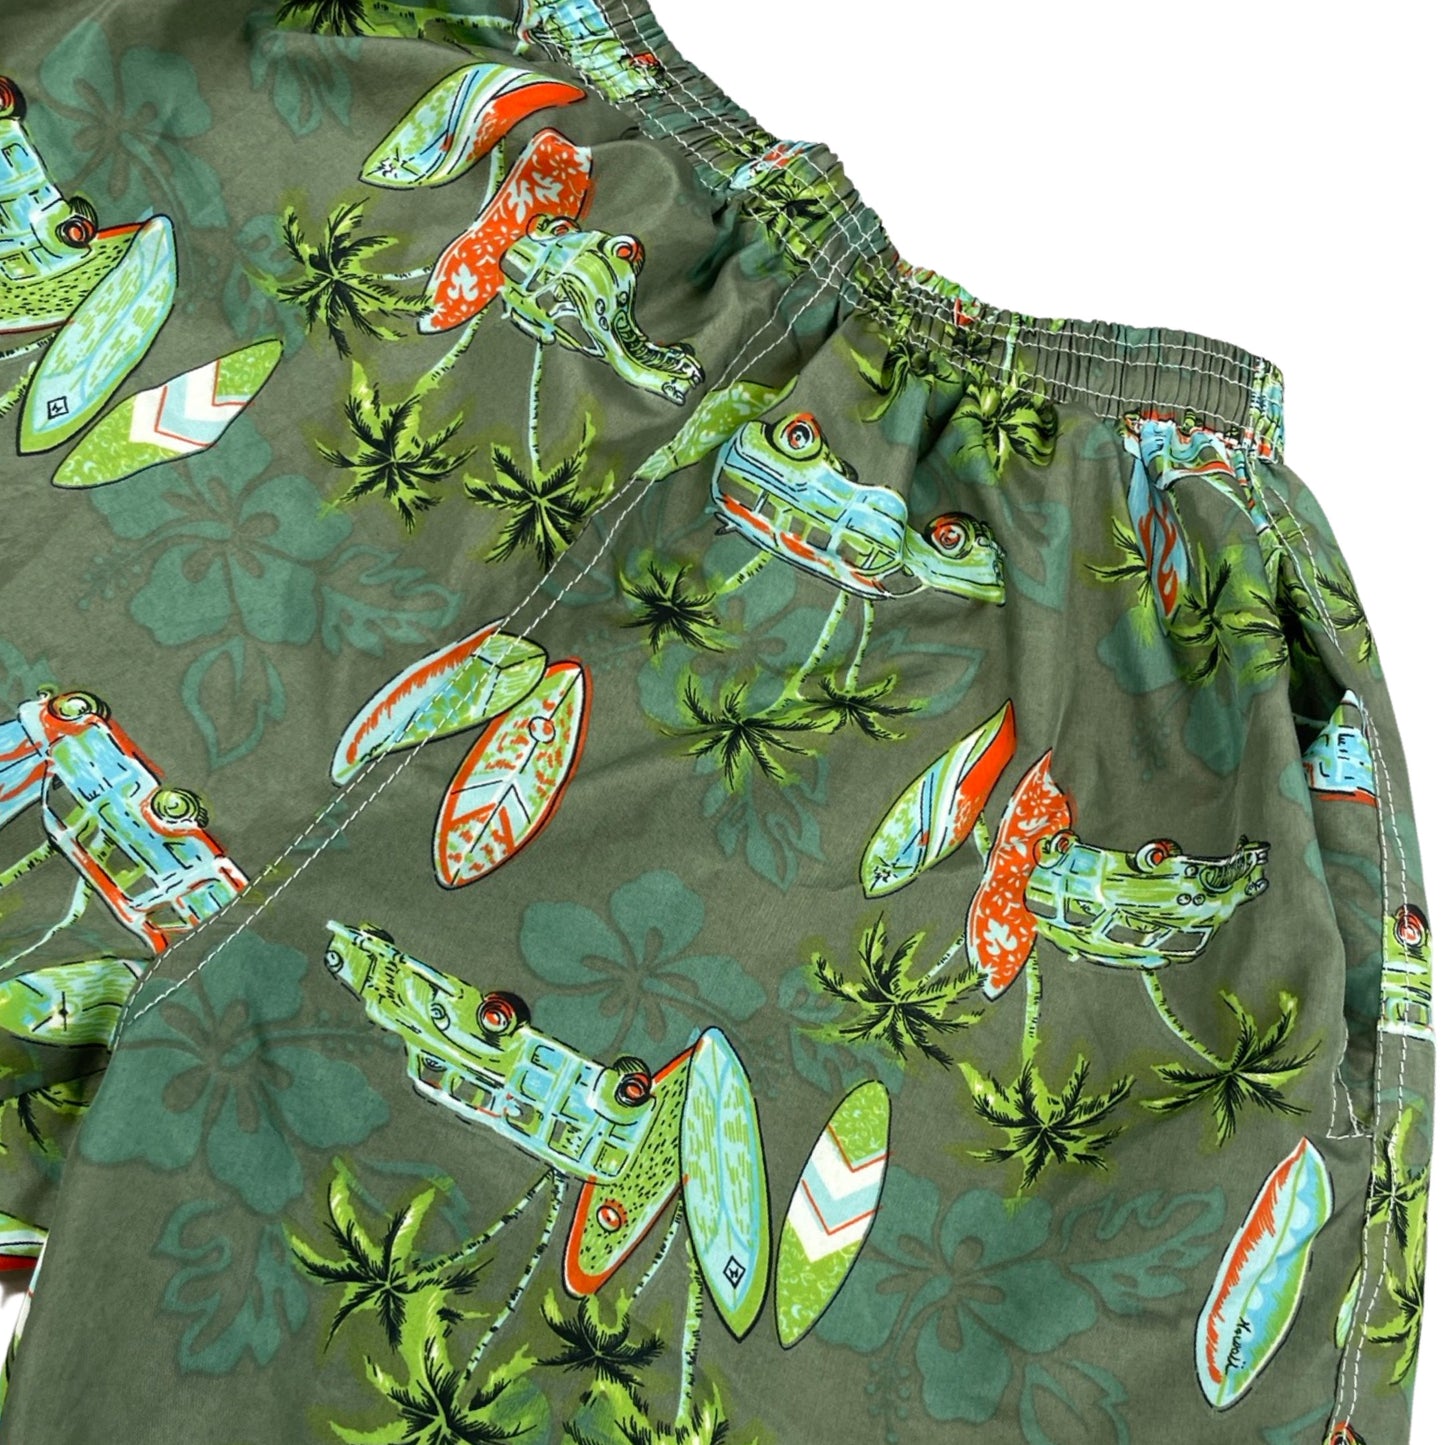 Vintage Printed Green Swimming Trunks S/M